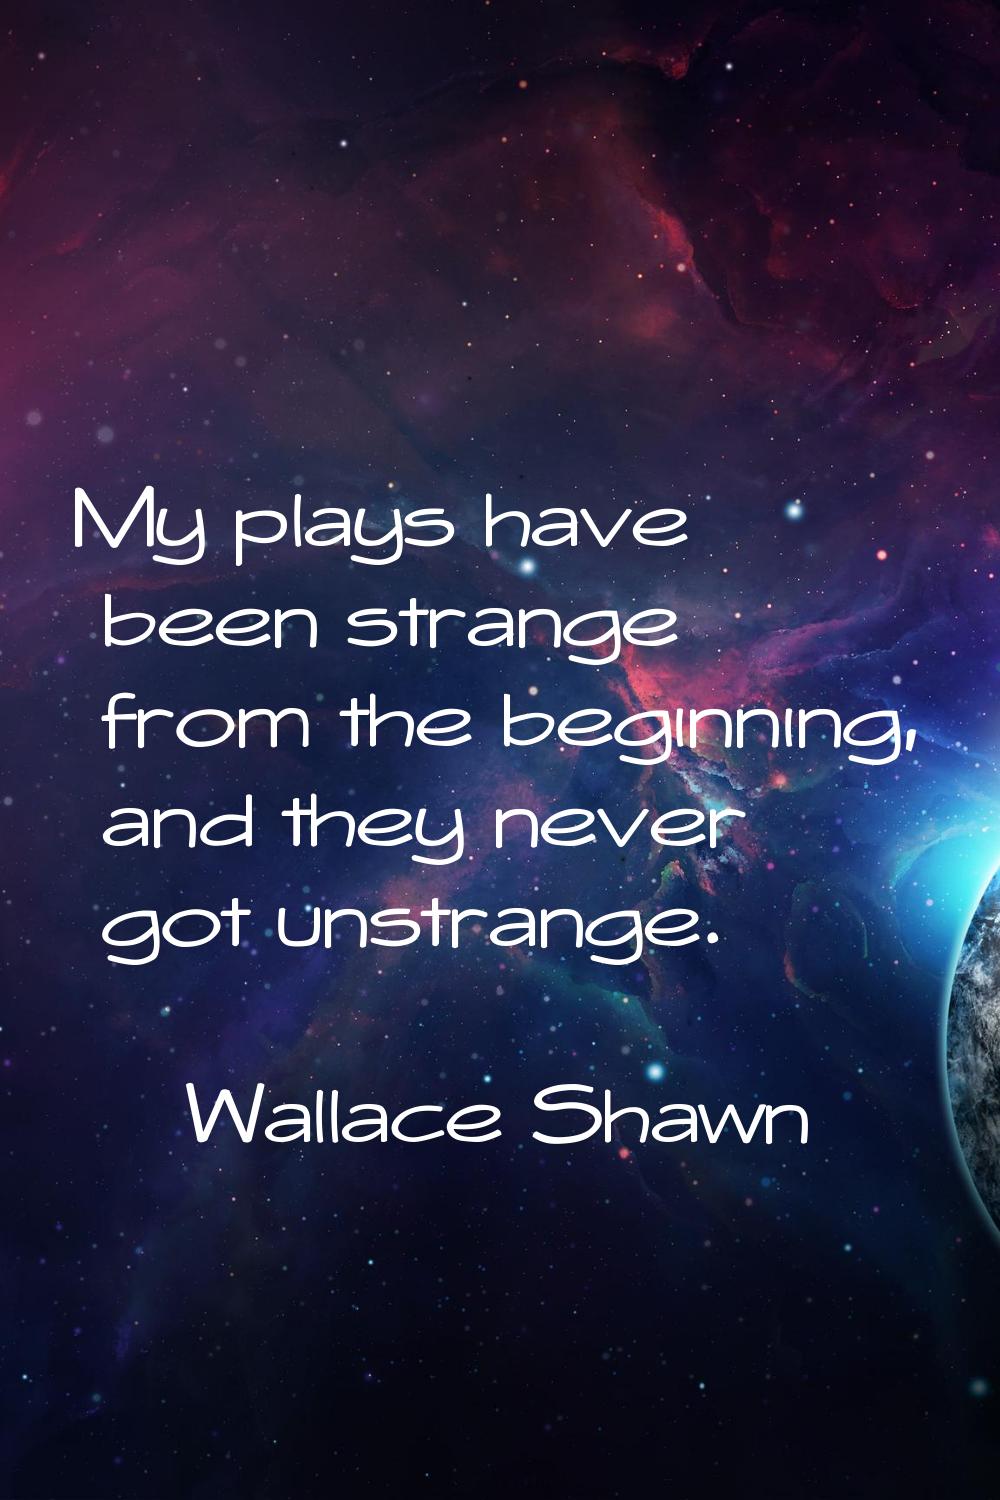 My plays have been strange from the beginning, and they never got unstrange.